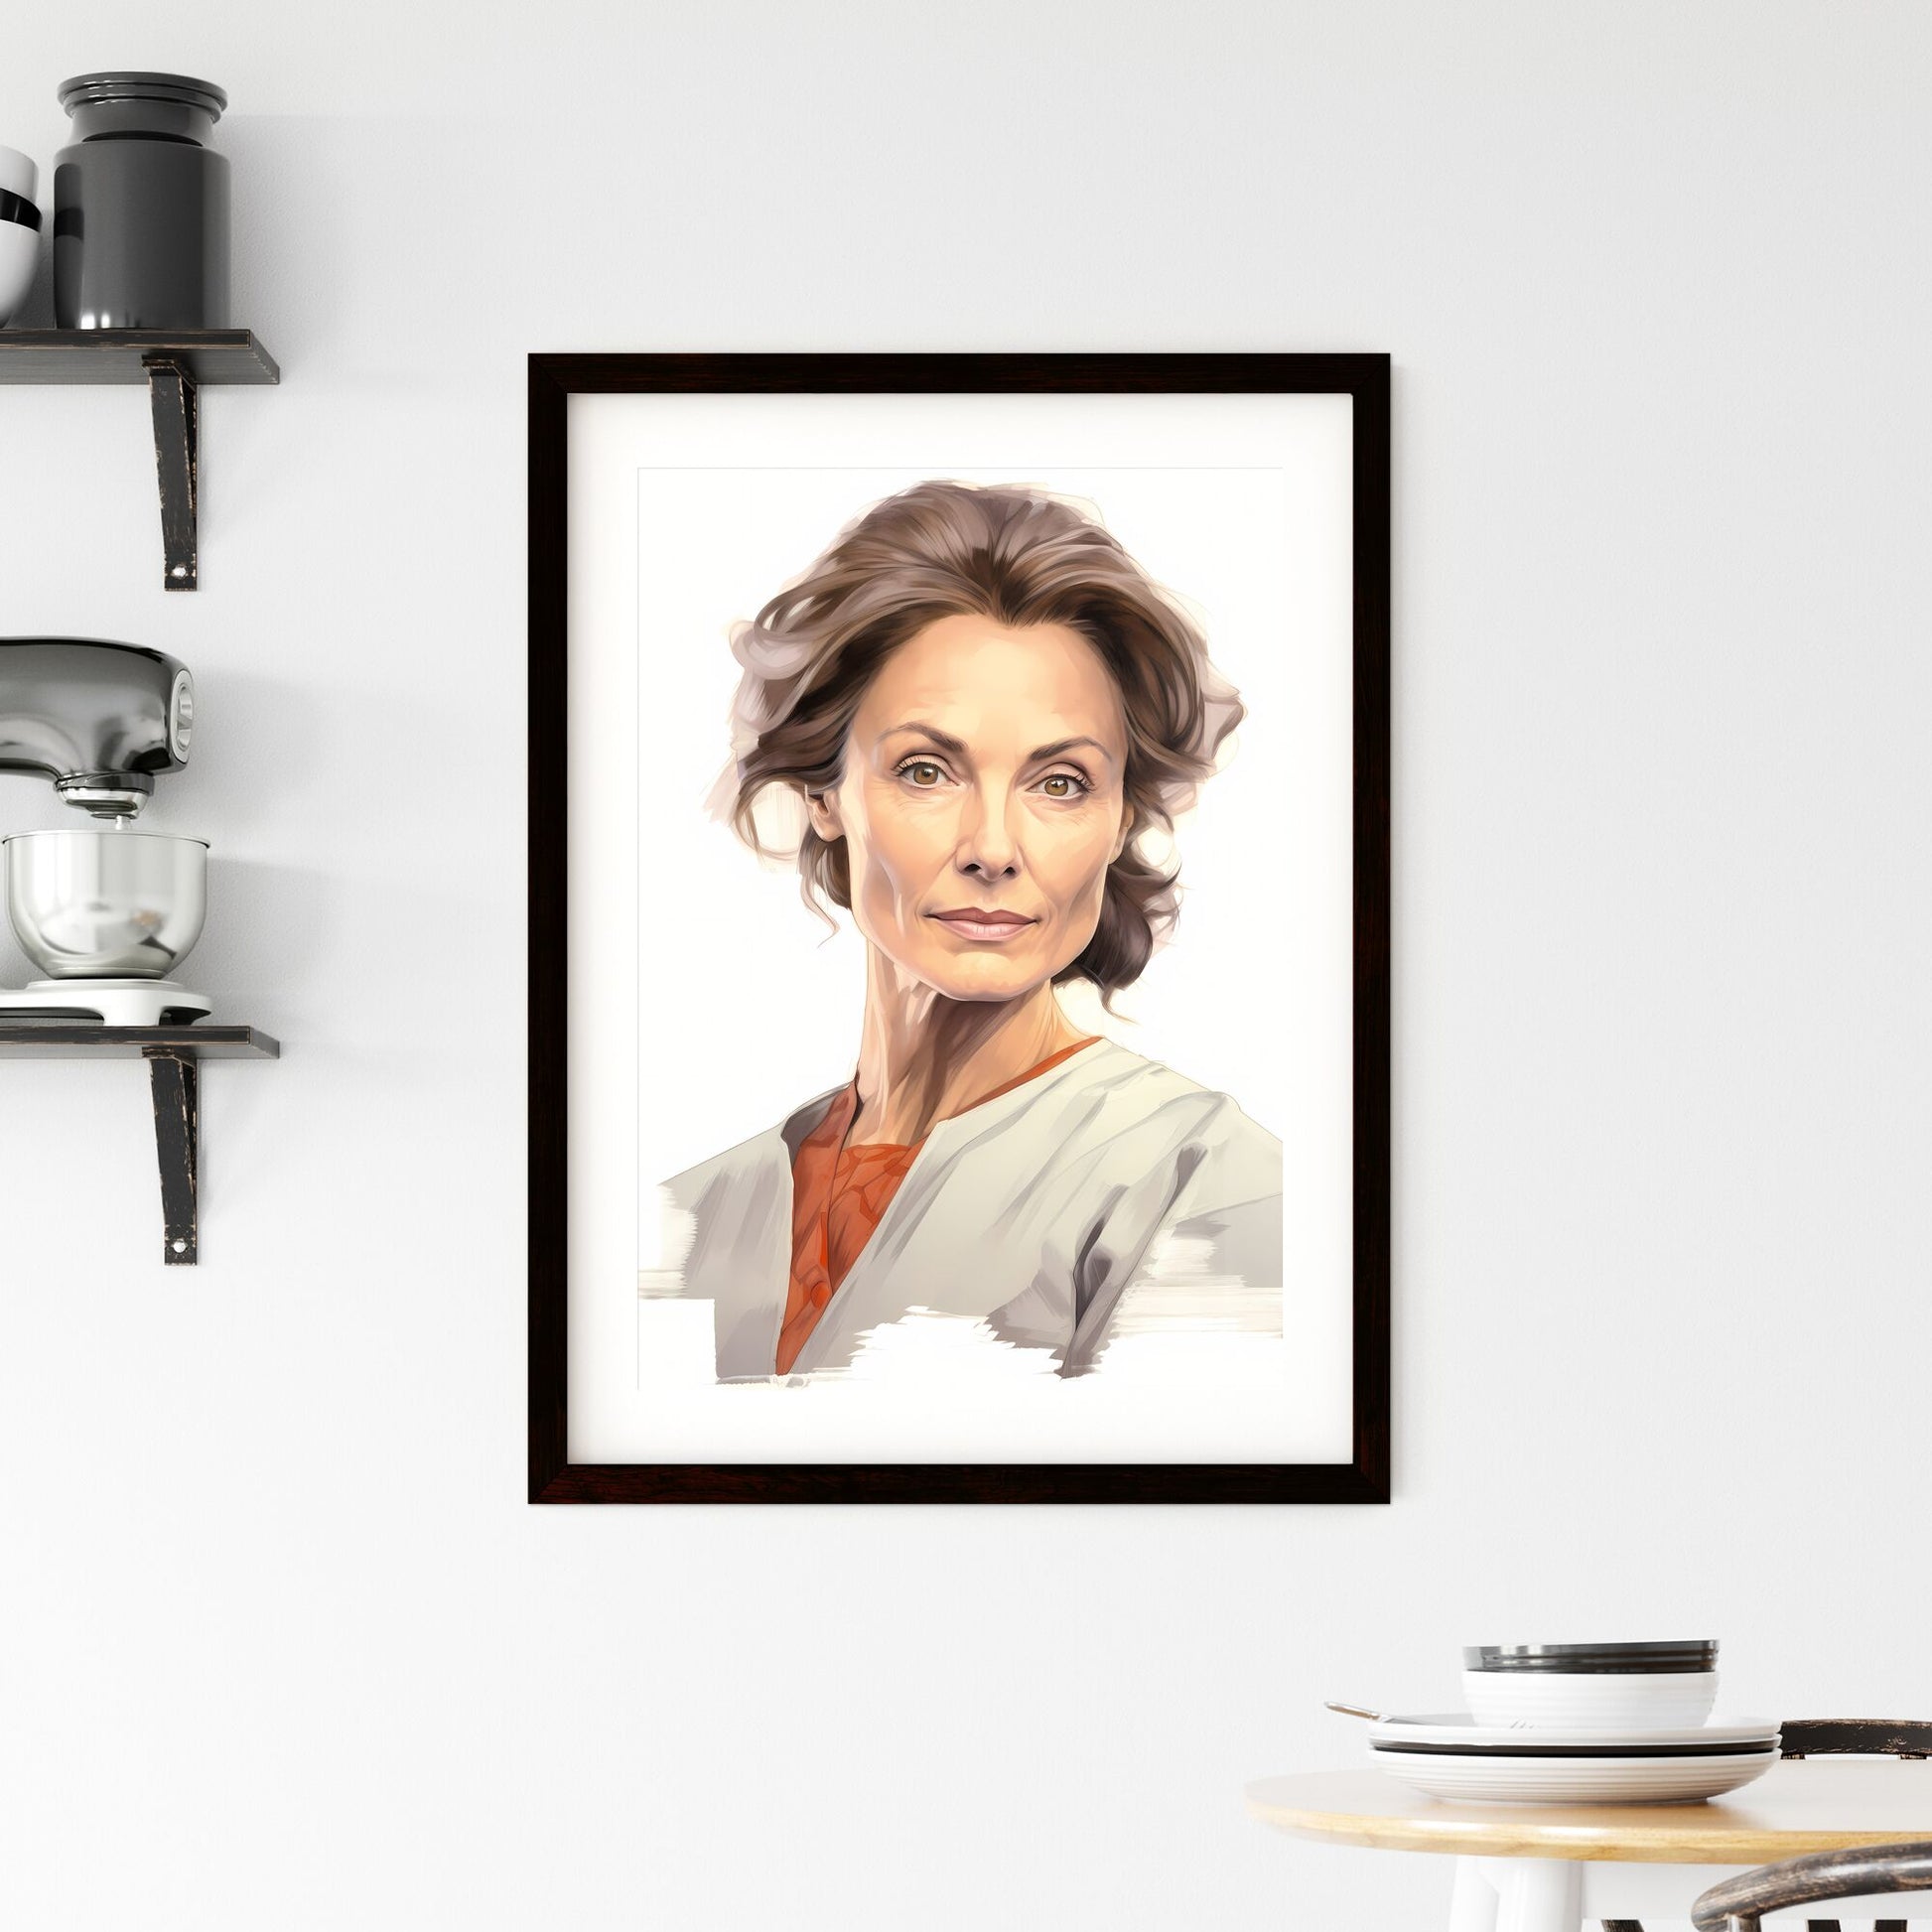 A Poster of beautiful mature woman 50 years old - A Woman With Brown Hair Default Title